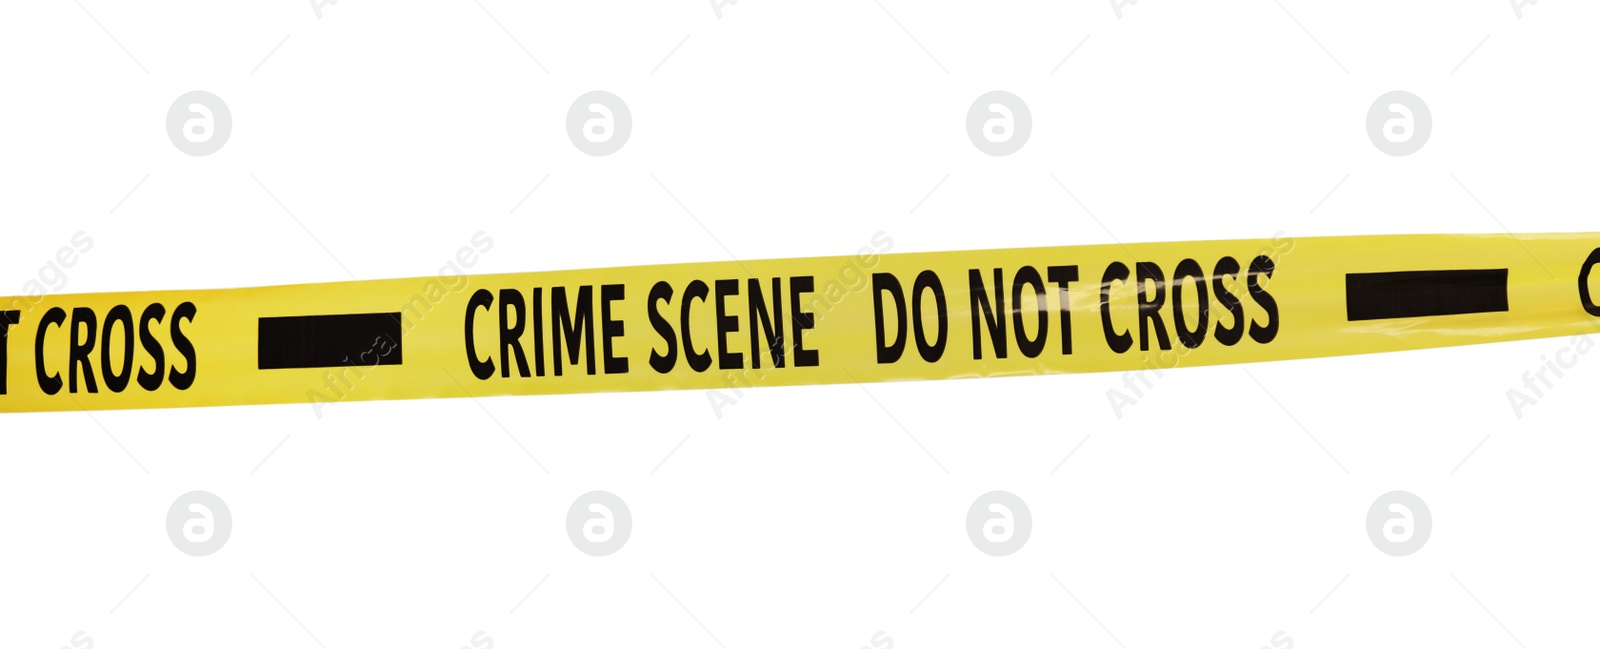 Photo of Yellow crime scene tape isolated on white